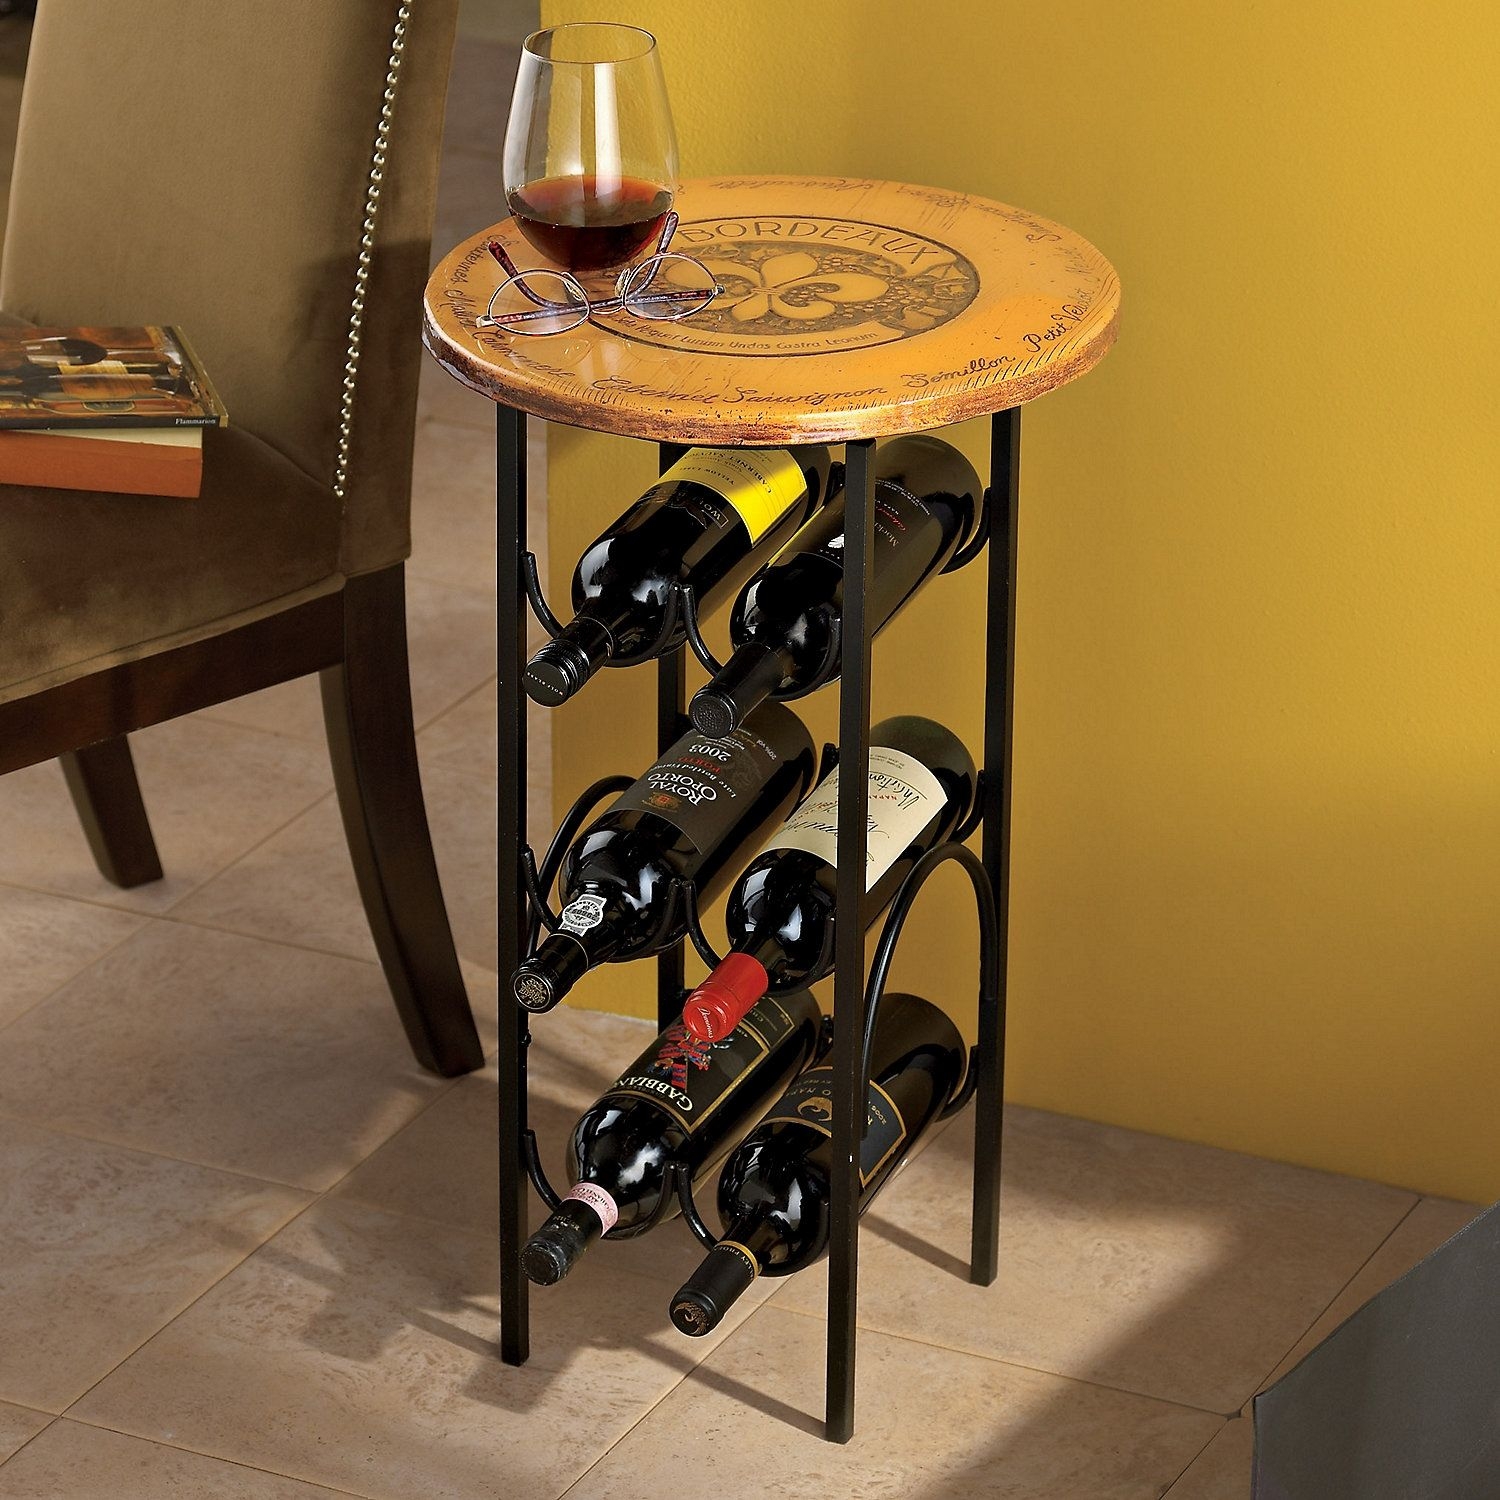 Wine rack made from horseshoes